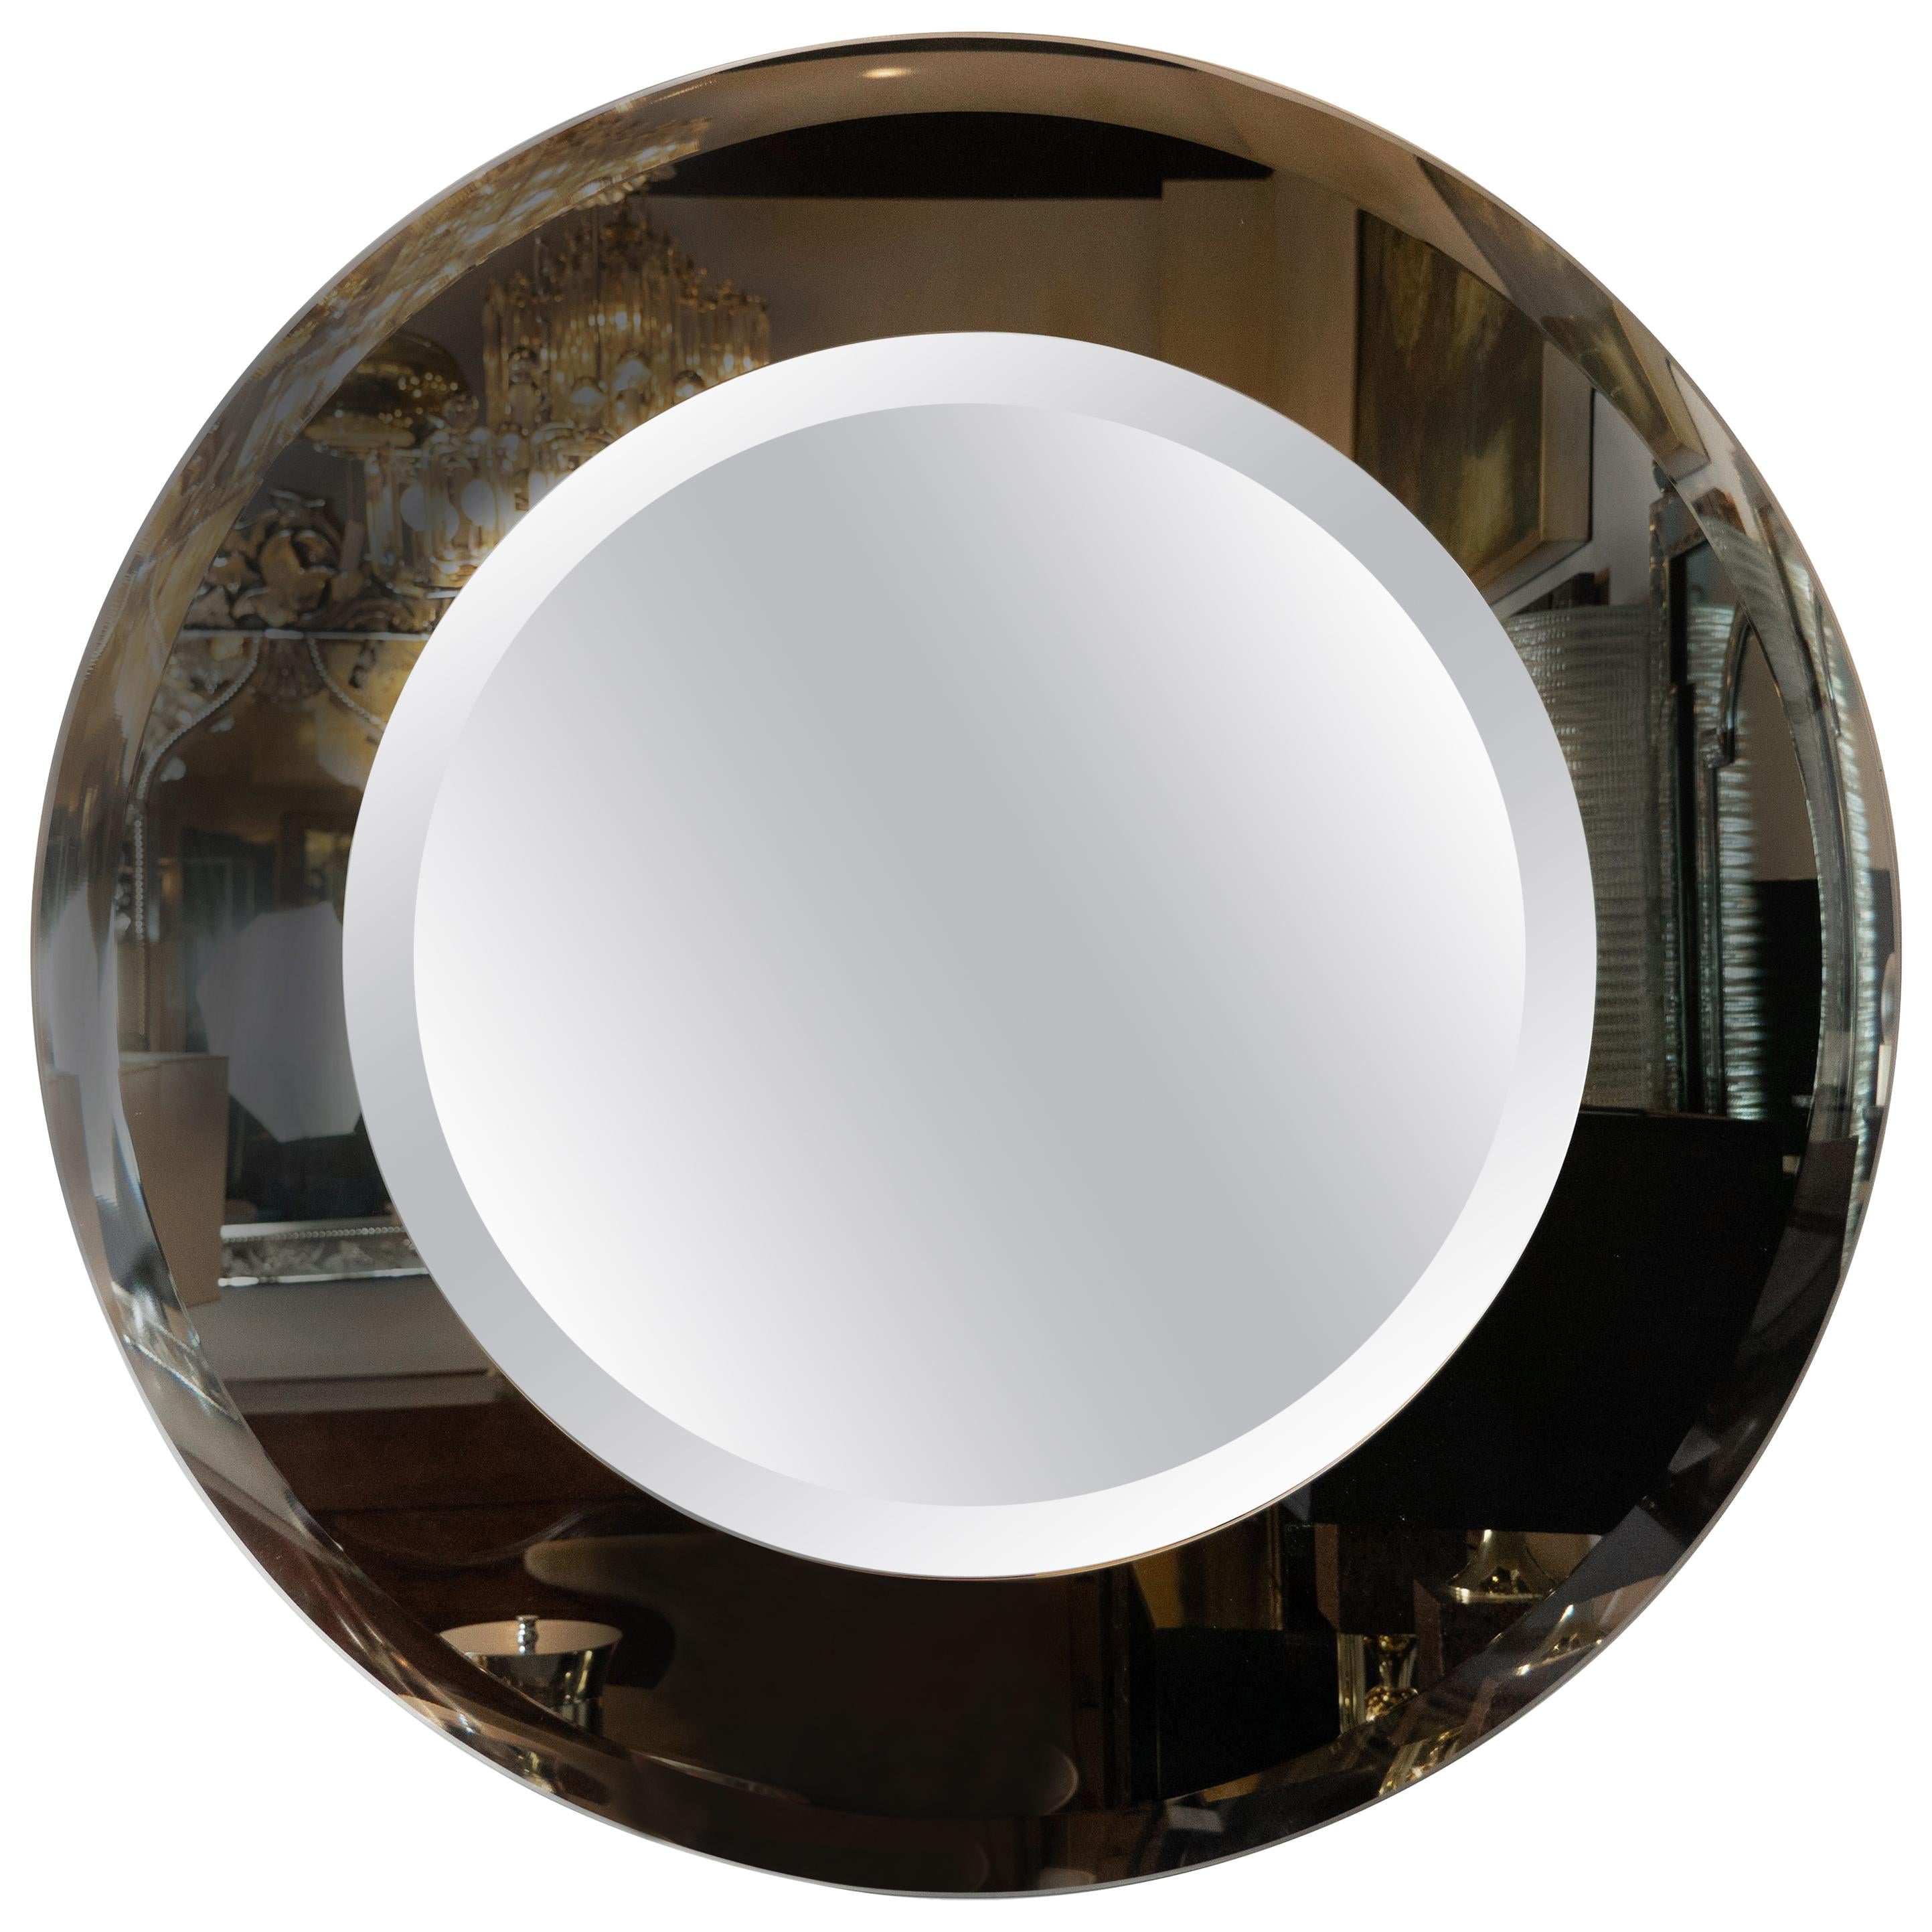 Sophisticated Modernist Custom-Made Starfire Mirror with Concentric Circles